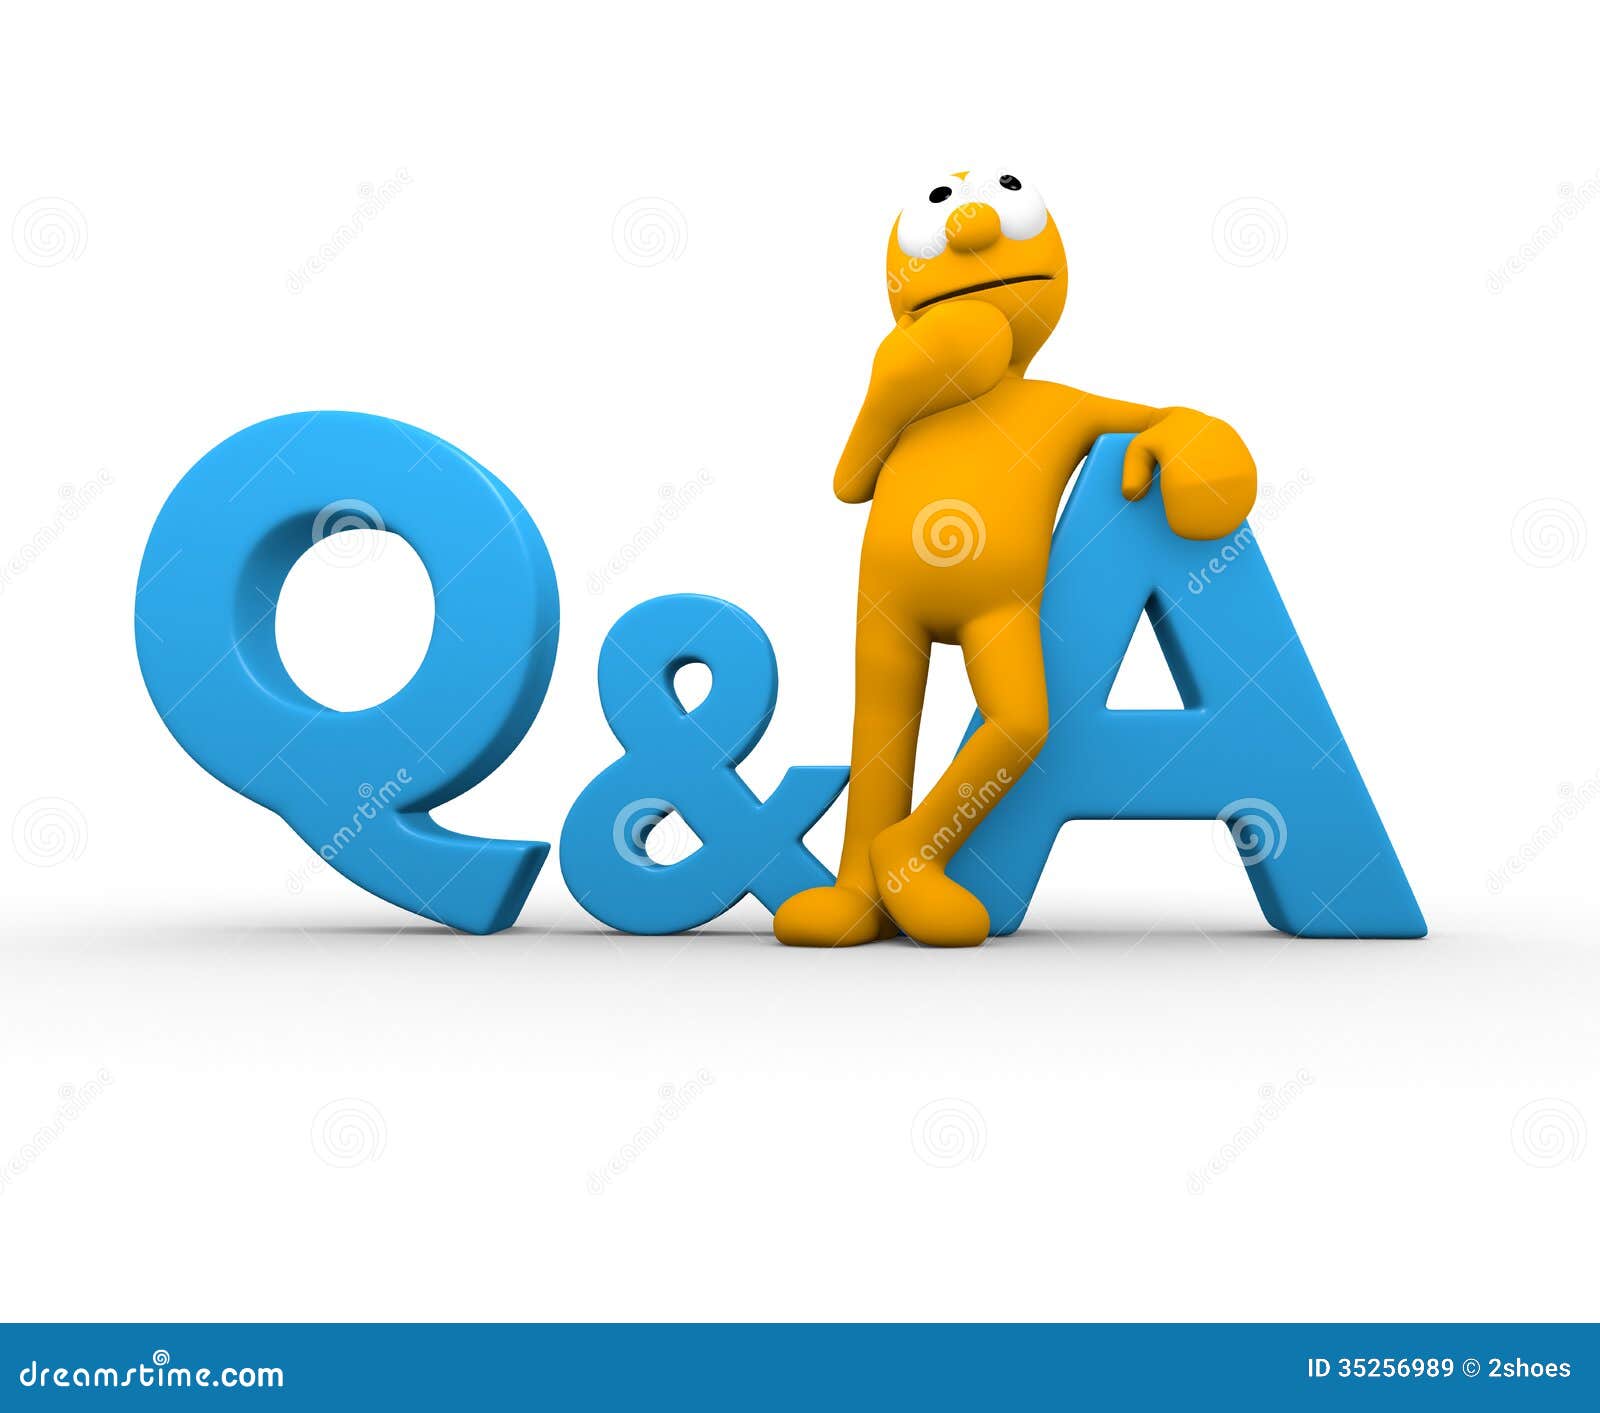 clipart of question and answer - photo #5